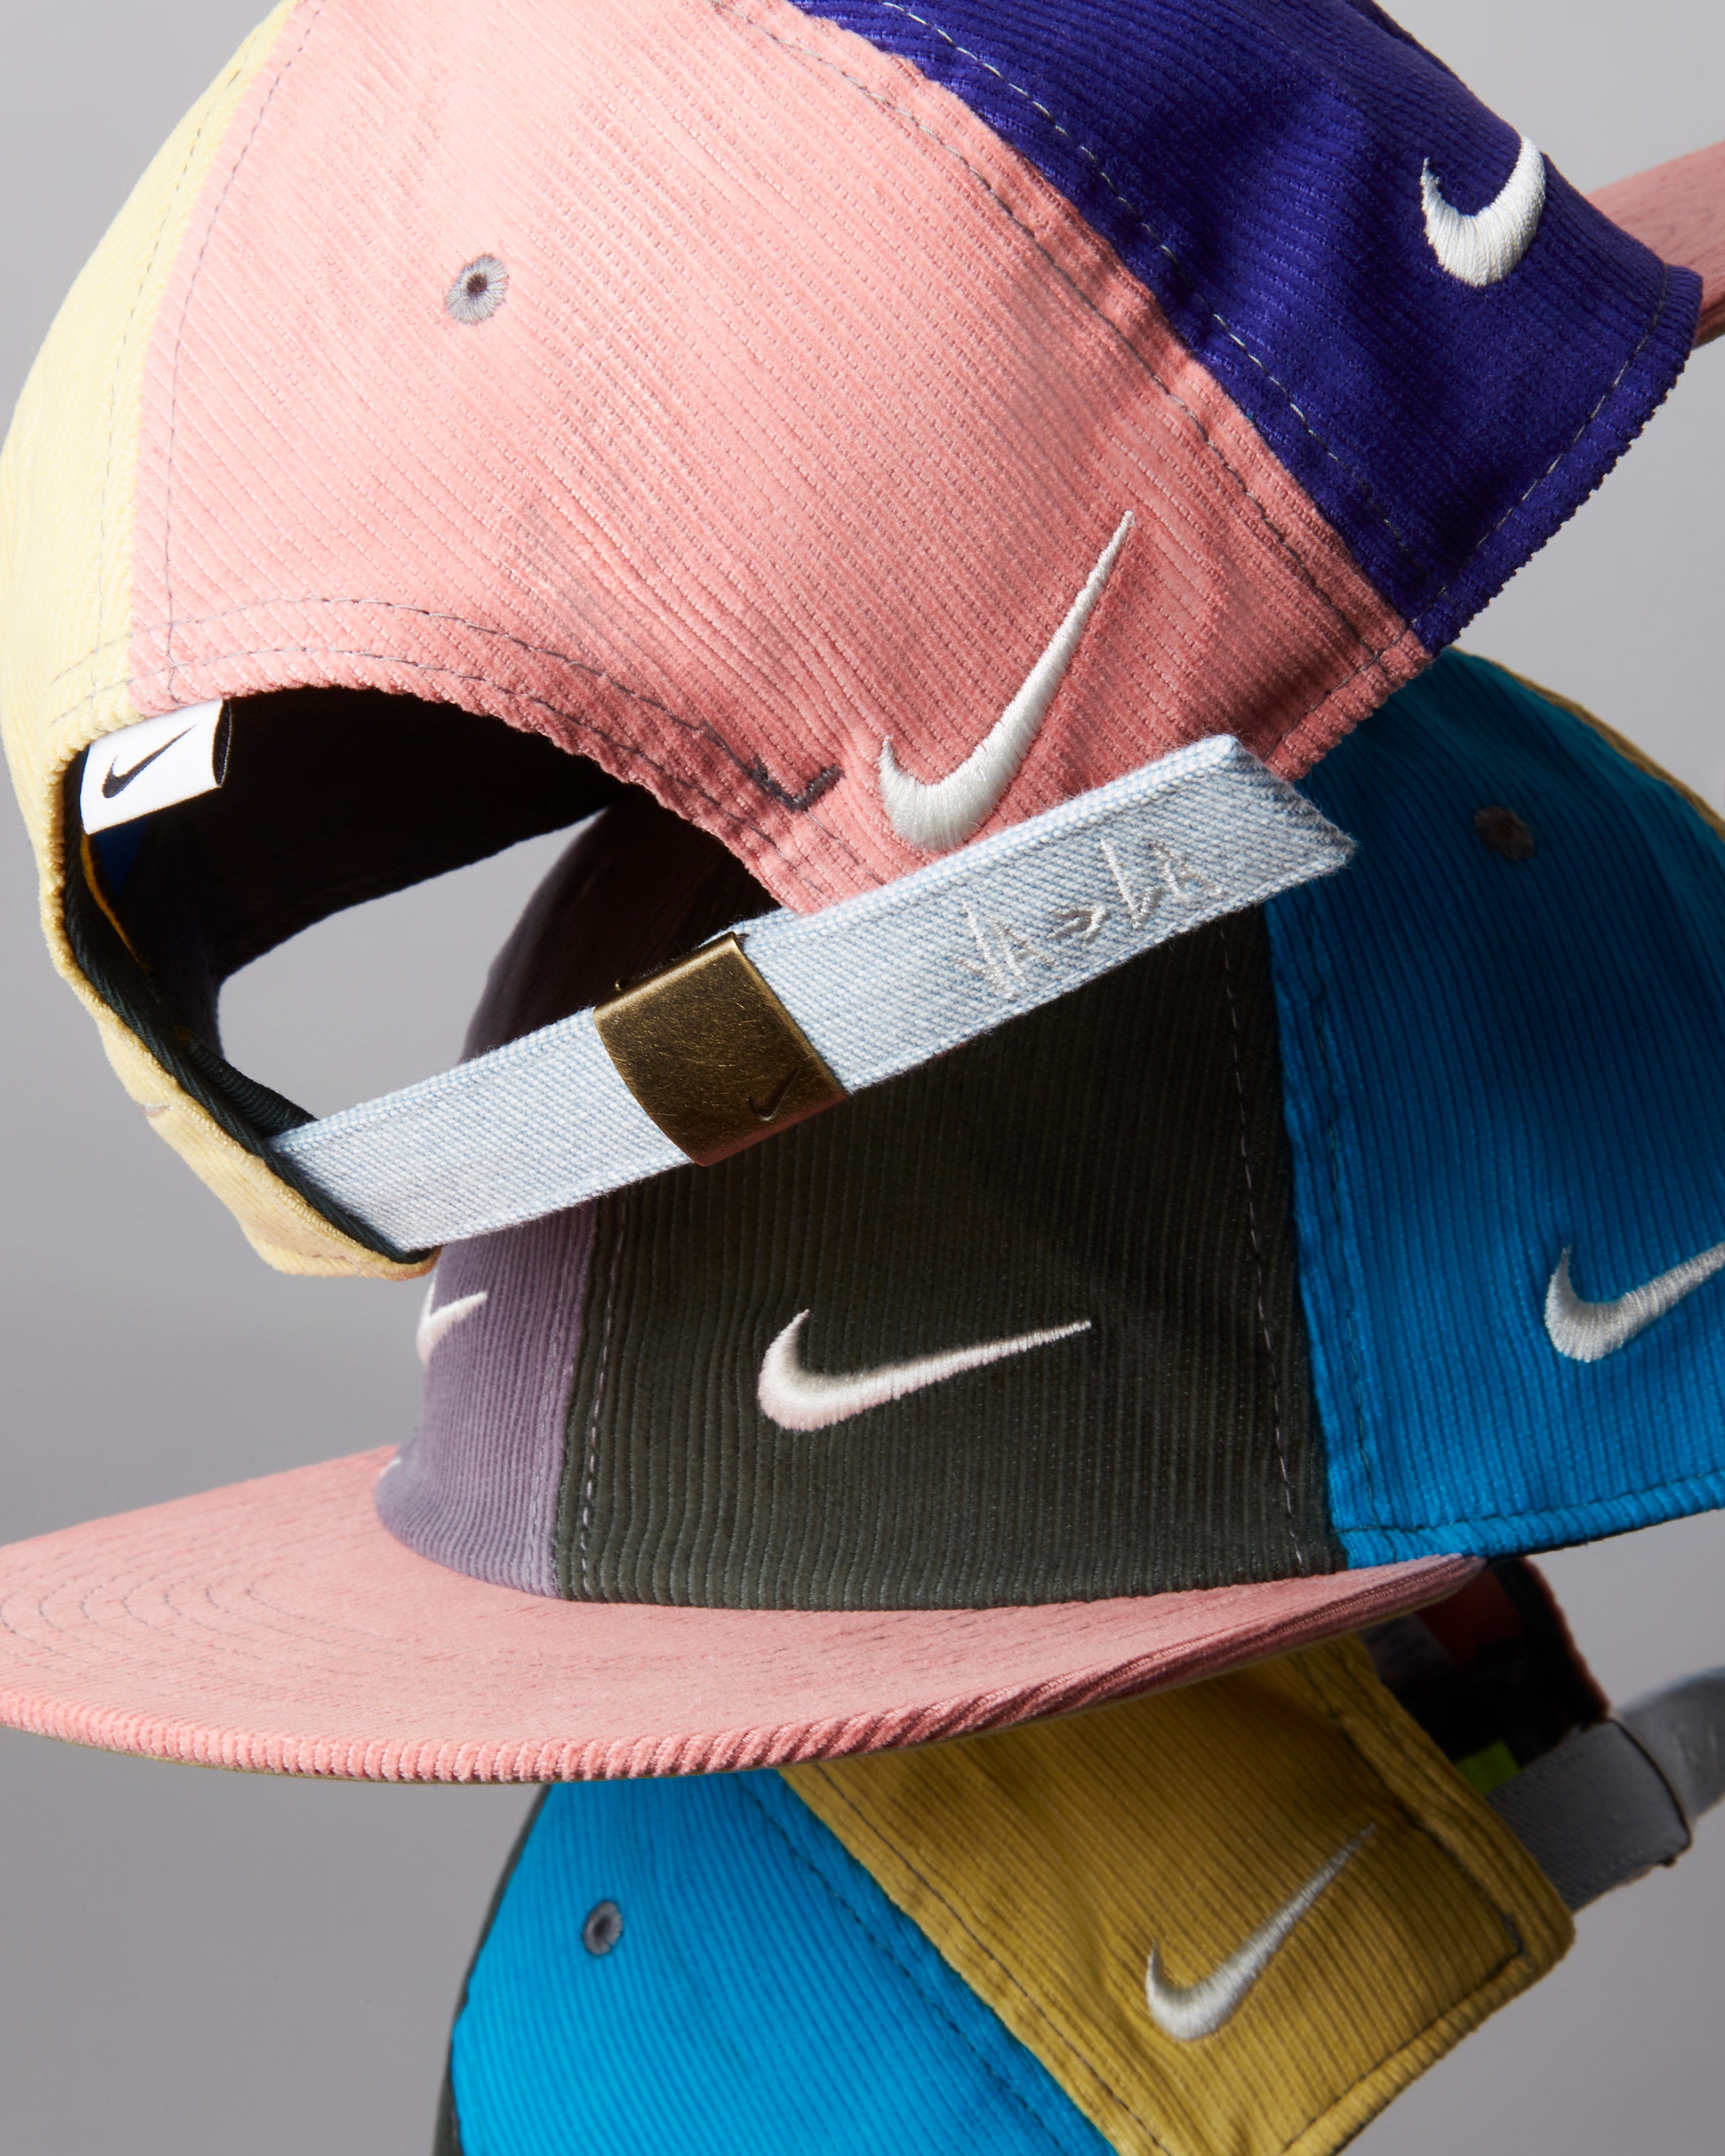 abuela Competir muestra END. on Twitter: "Now available online -- the @Nike x Sean Wotherspoon H86  Cap (£25). https://t.co/k2nFLXNgjl https://t.co/Aw7xoIEA2T" / Twitter